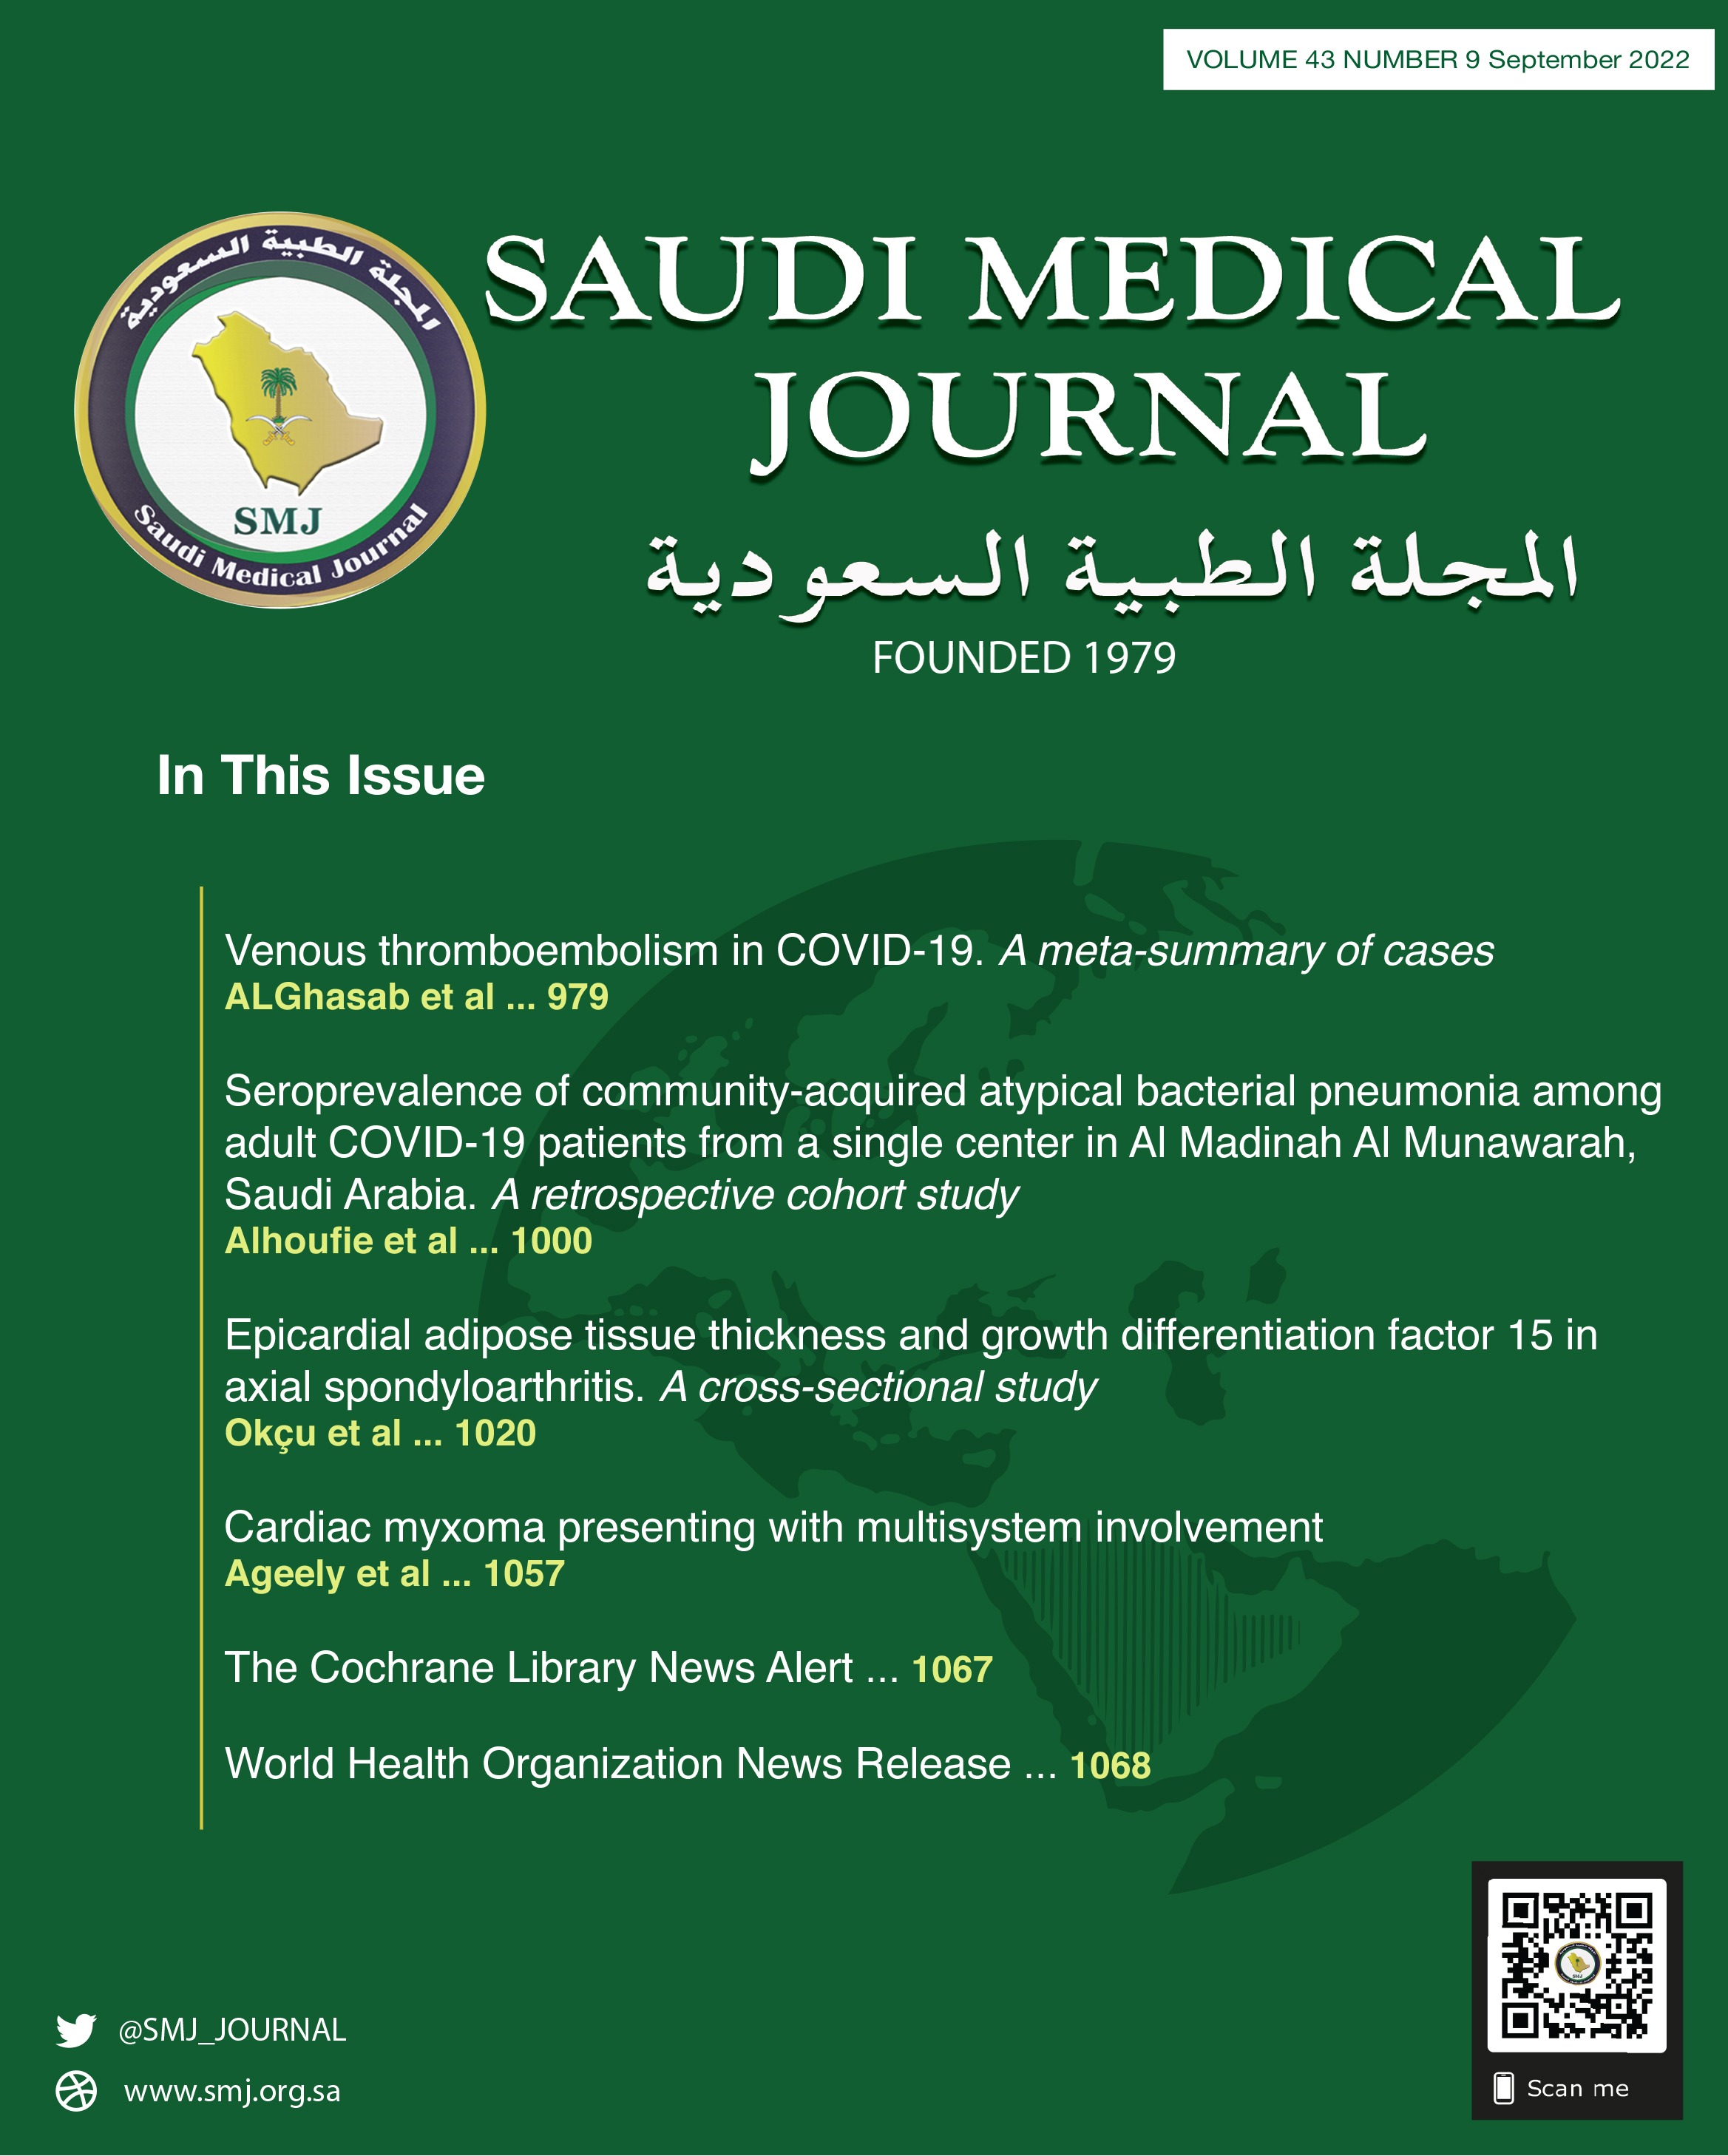 Seroprevalence of community-acquired atypical bacterial pneumonia among adult COVID-19 patients from a single center in Al Madinah Al Munawarah, Saudi Arabia: A retrospective cohort study